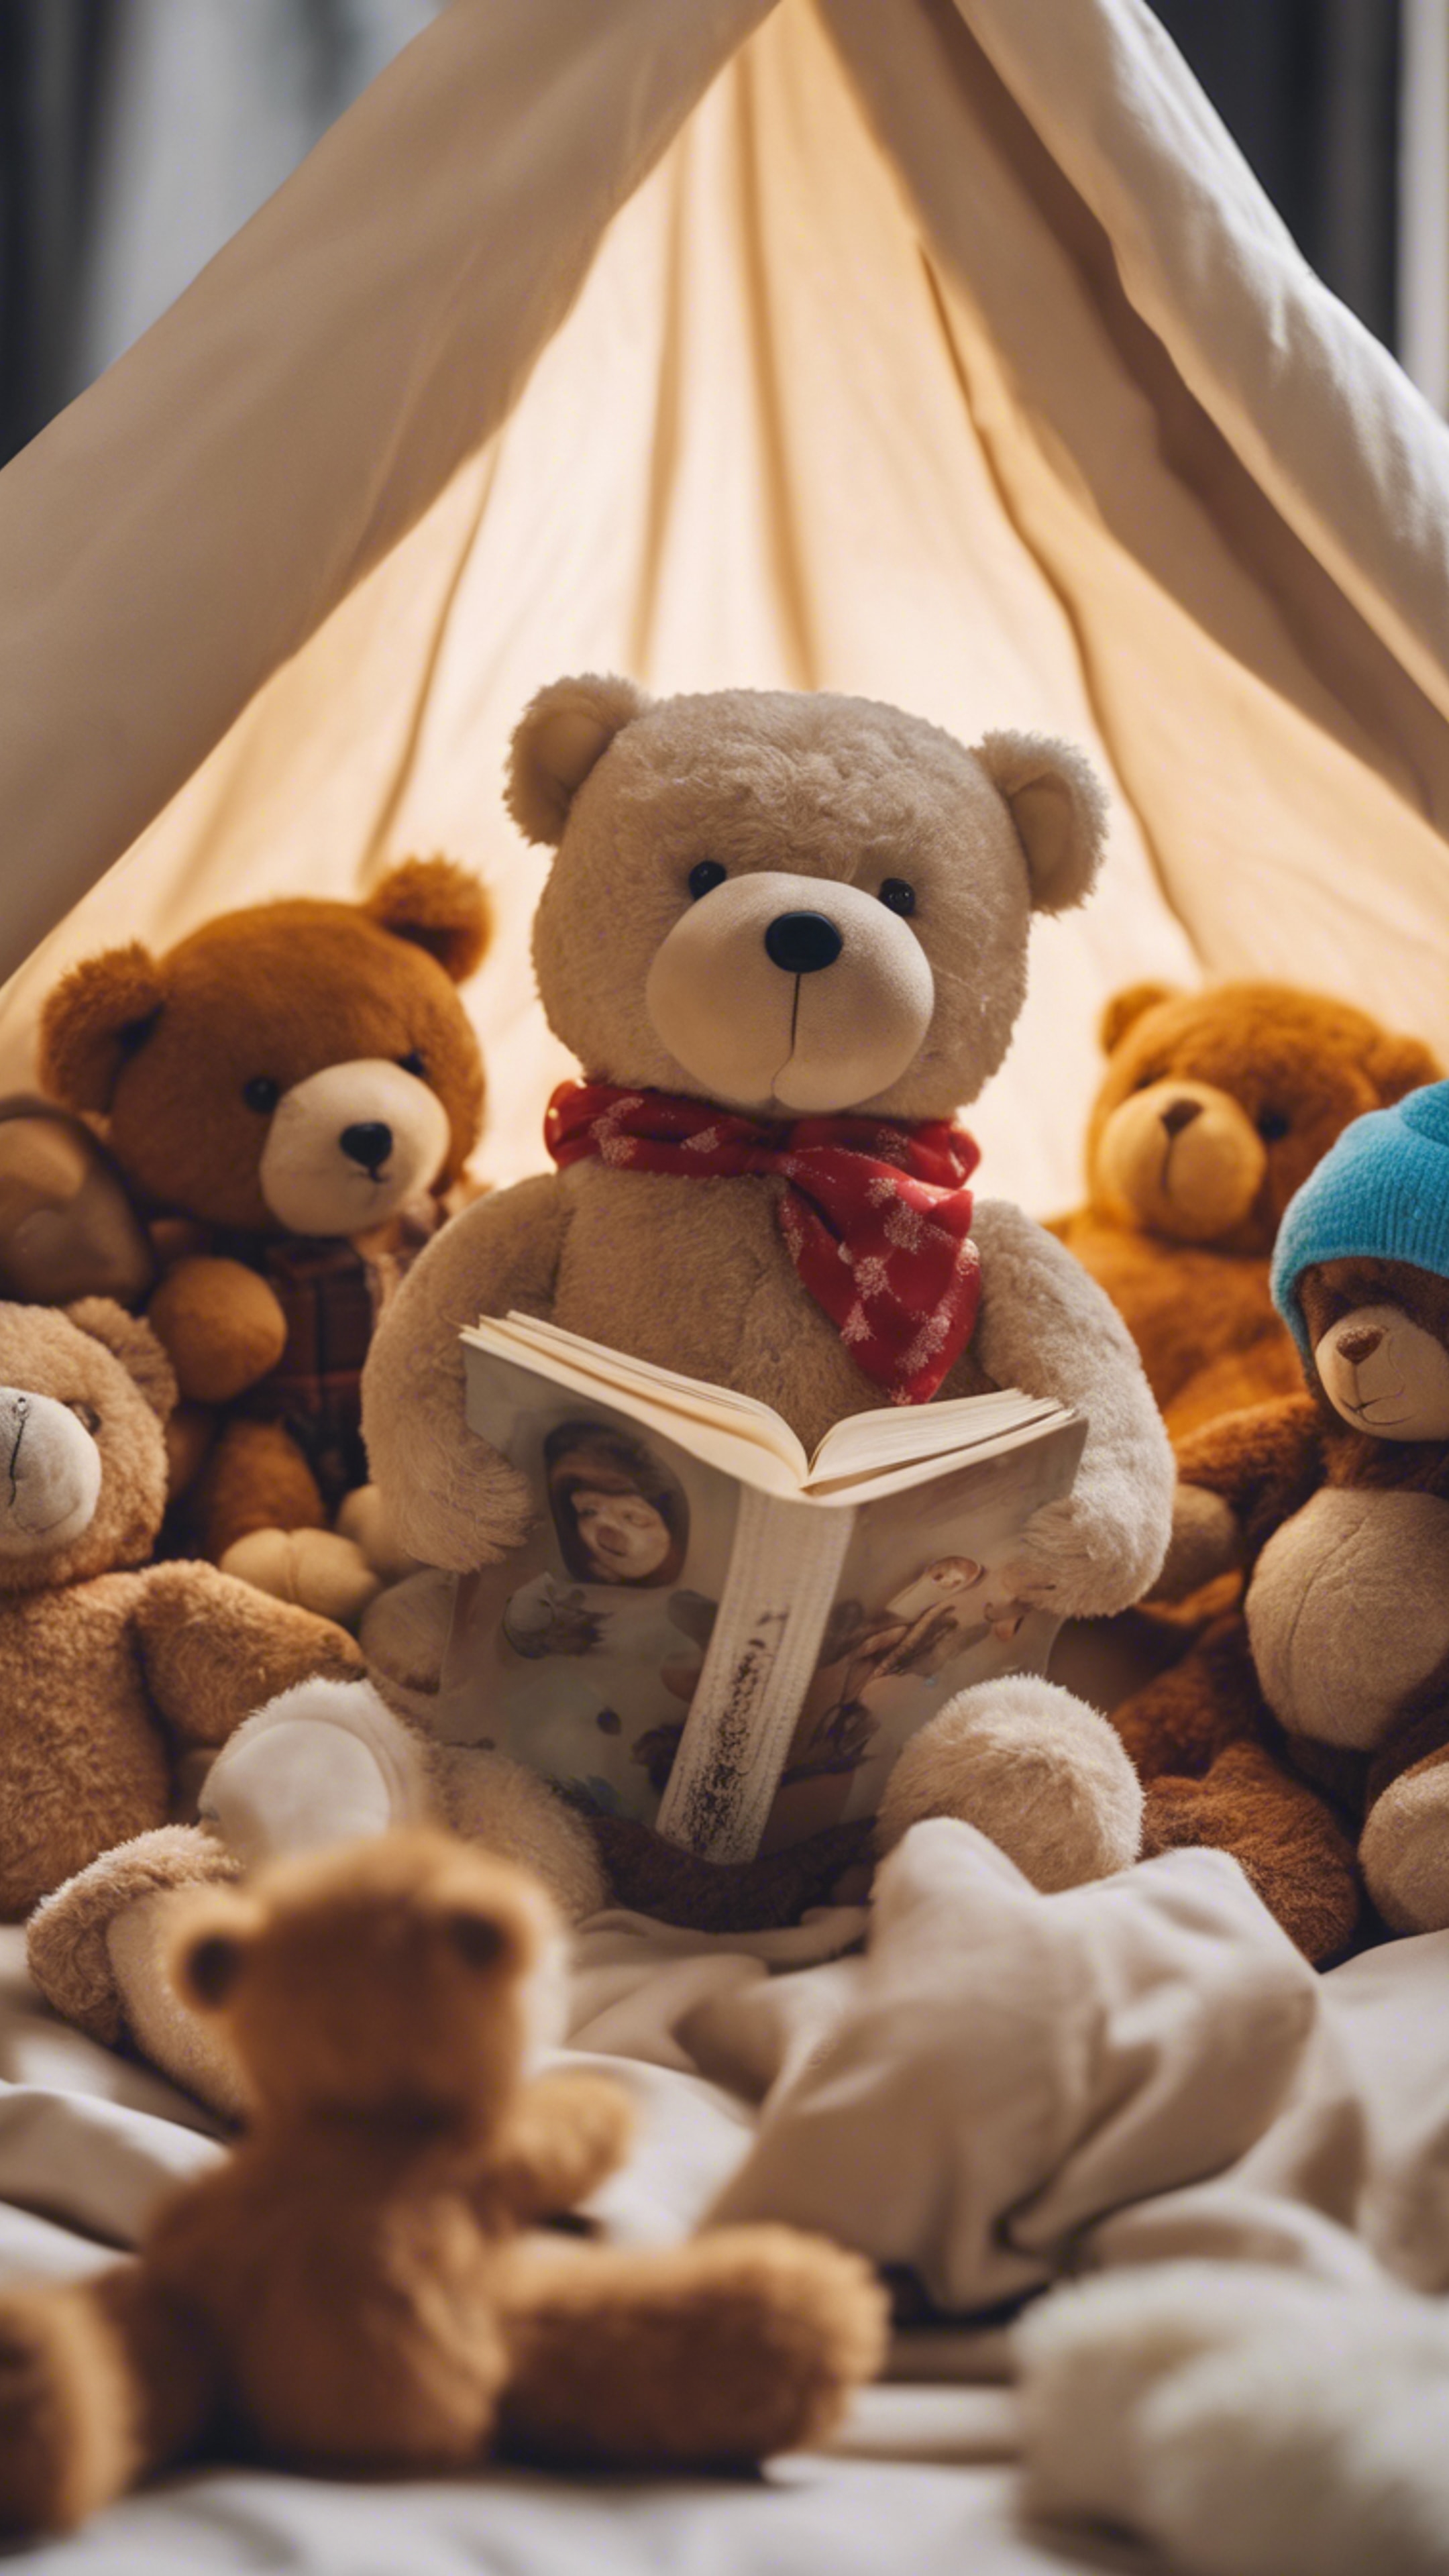 A teddy bear reading a story to a group of animal toys under a blanket fort. ورق الجدران[8c29e330caea492dba8f]